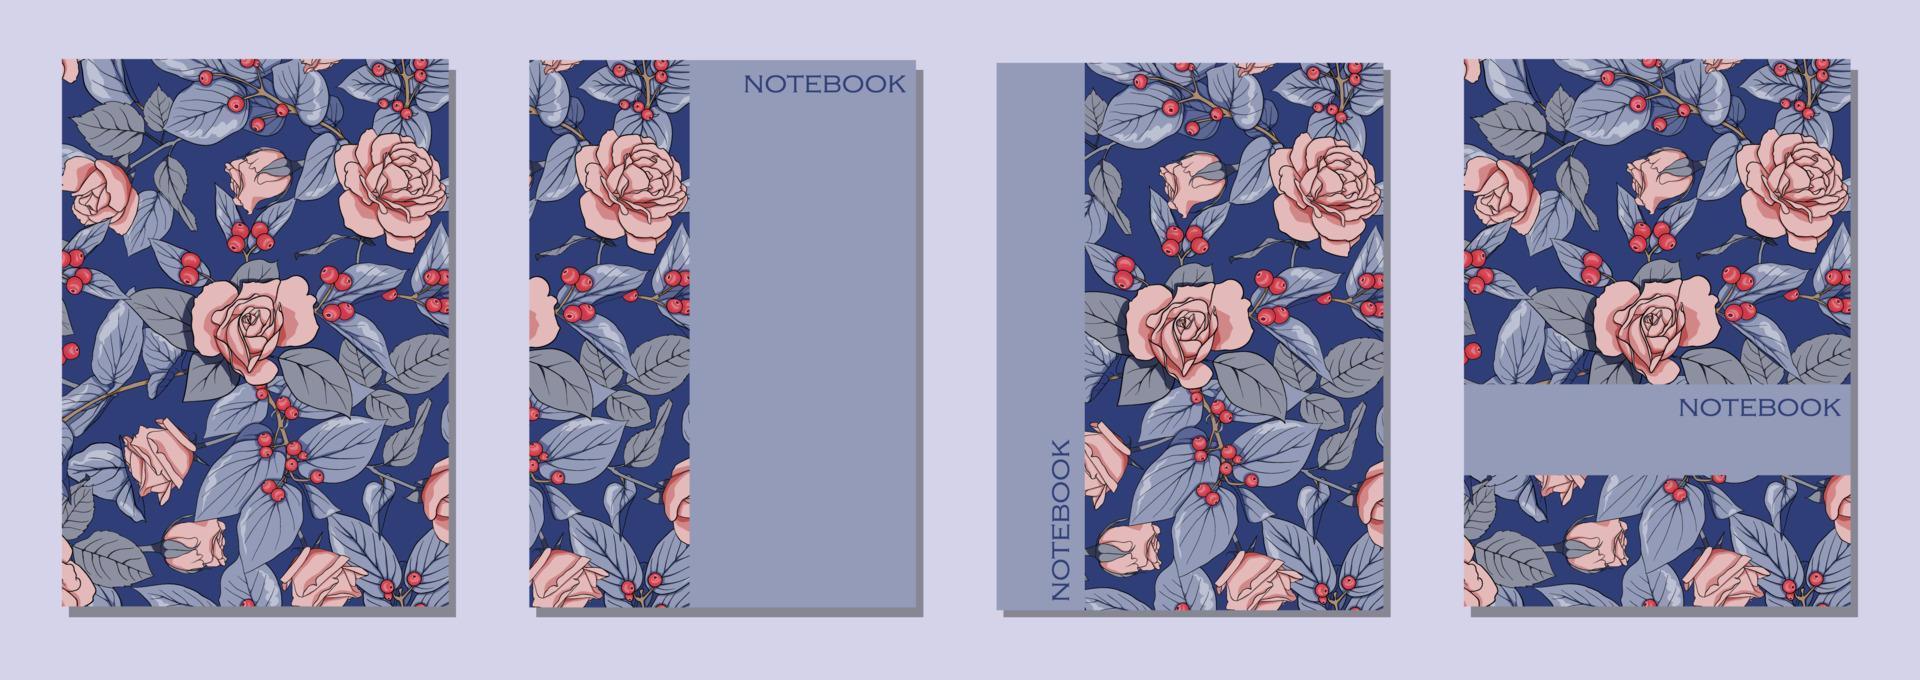 Cover template. Vector web of floral templates for notebooks, diaries, catalogs, brochures, books, etc.